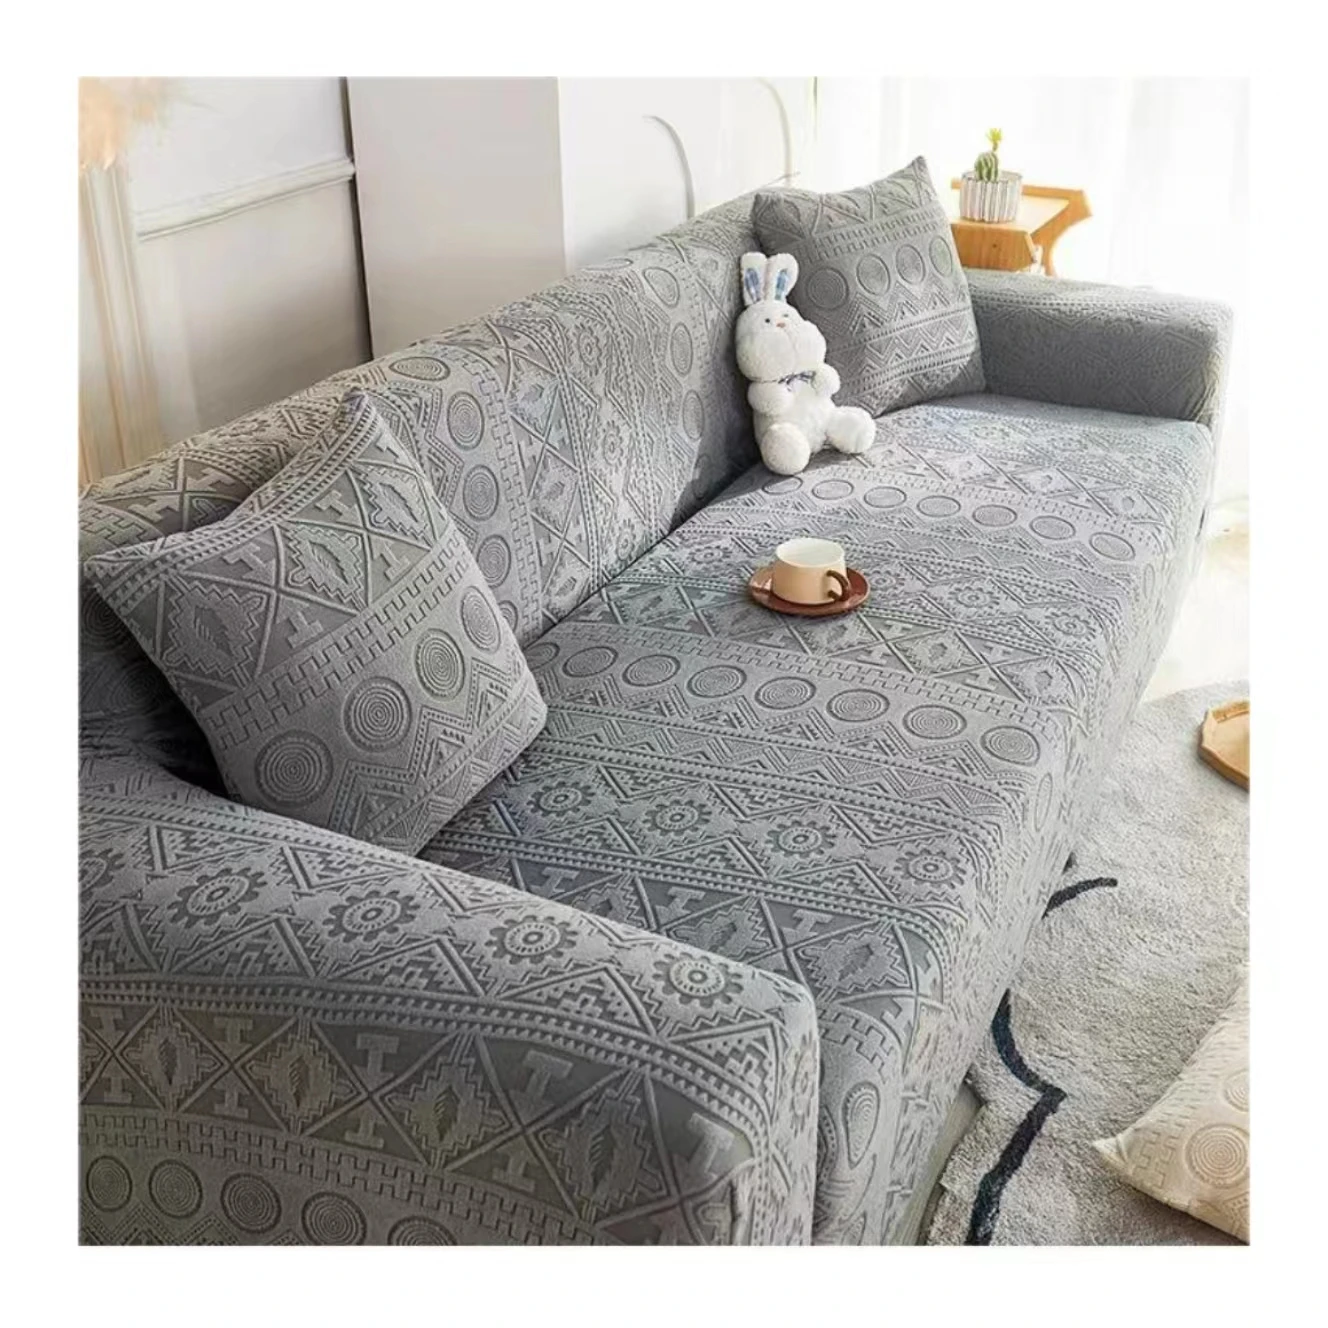 Wholesale Knitted Brushed Sofa Cover Elastic Multi New Designs Universal Covers For Sofa removable cover